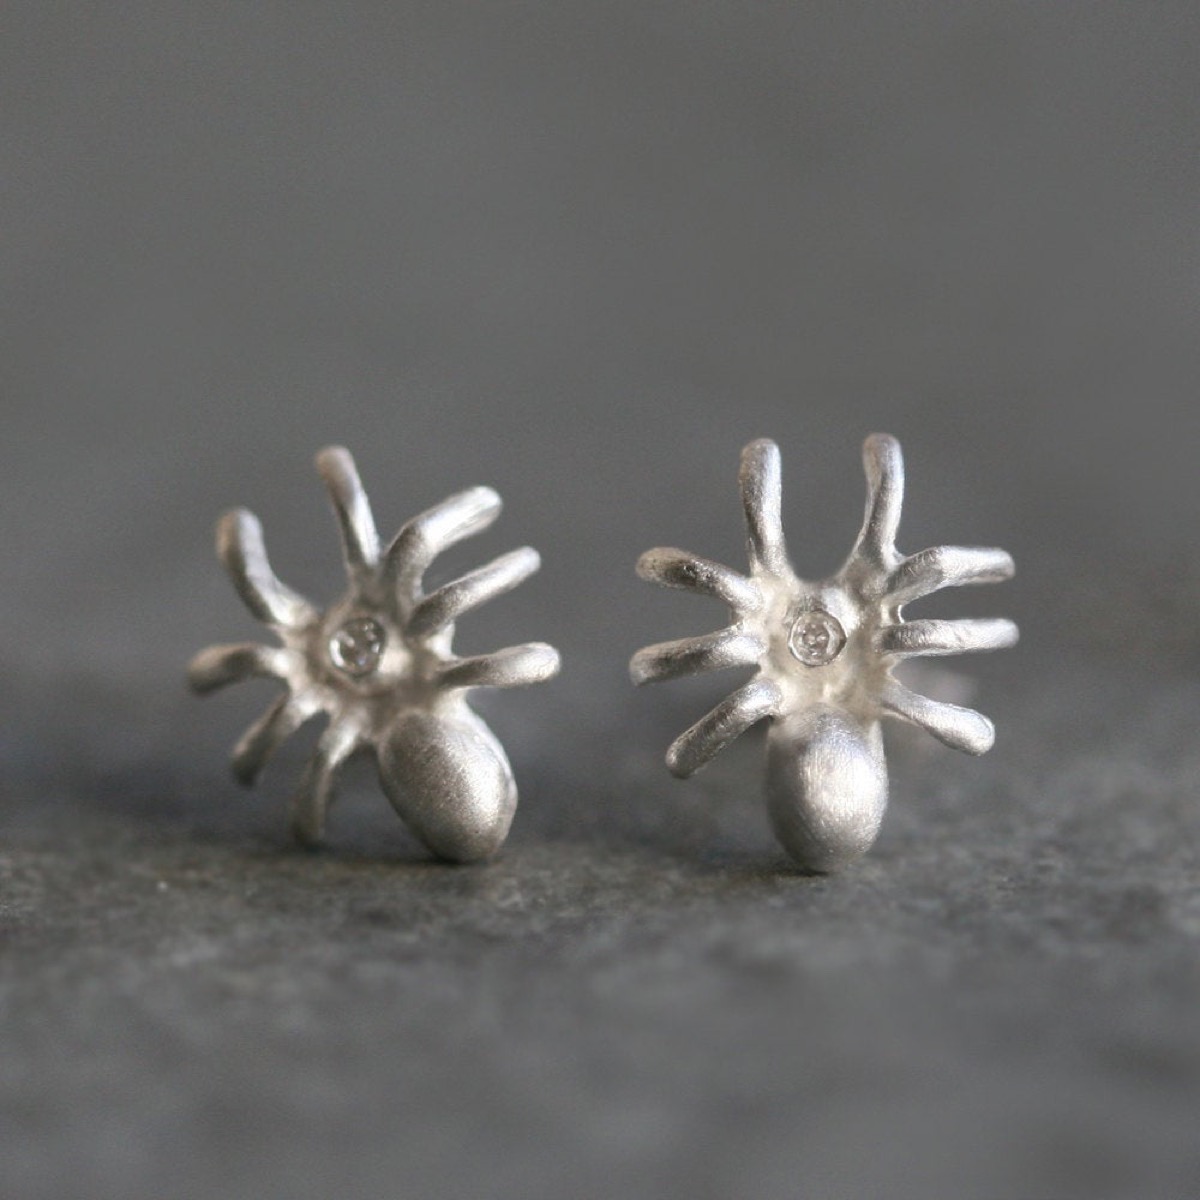 silver spider earrings with diamonds in them, Etsy jewelry